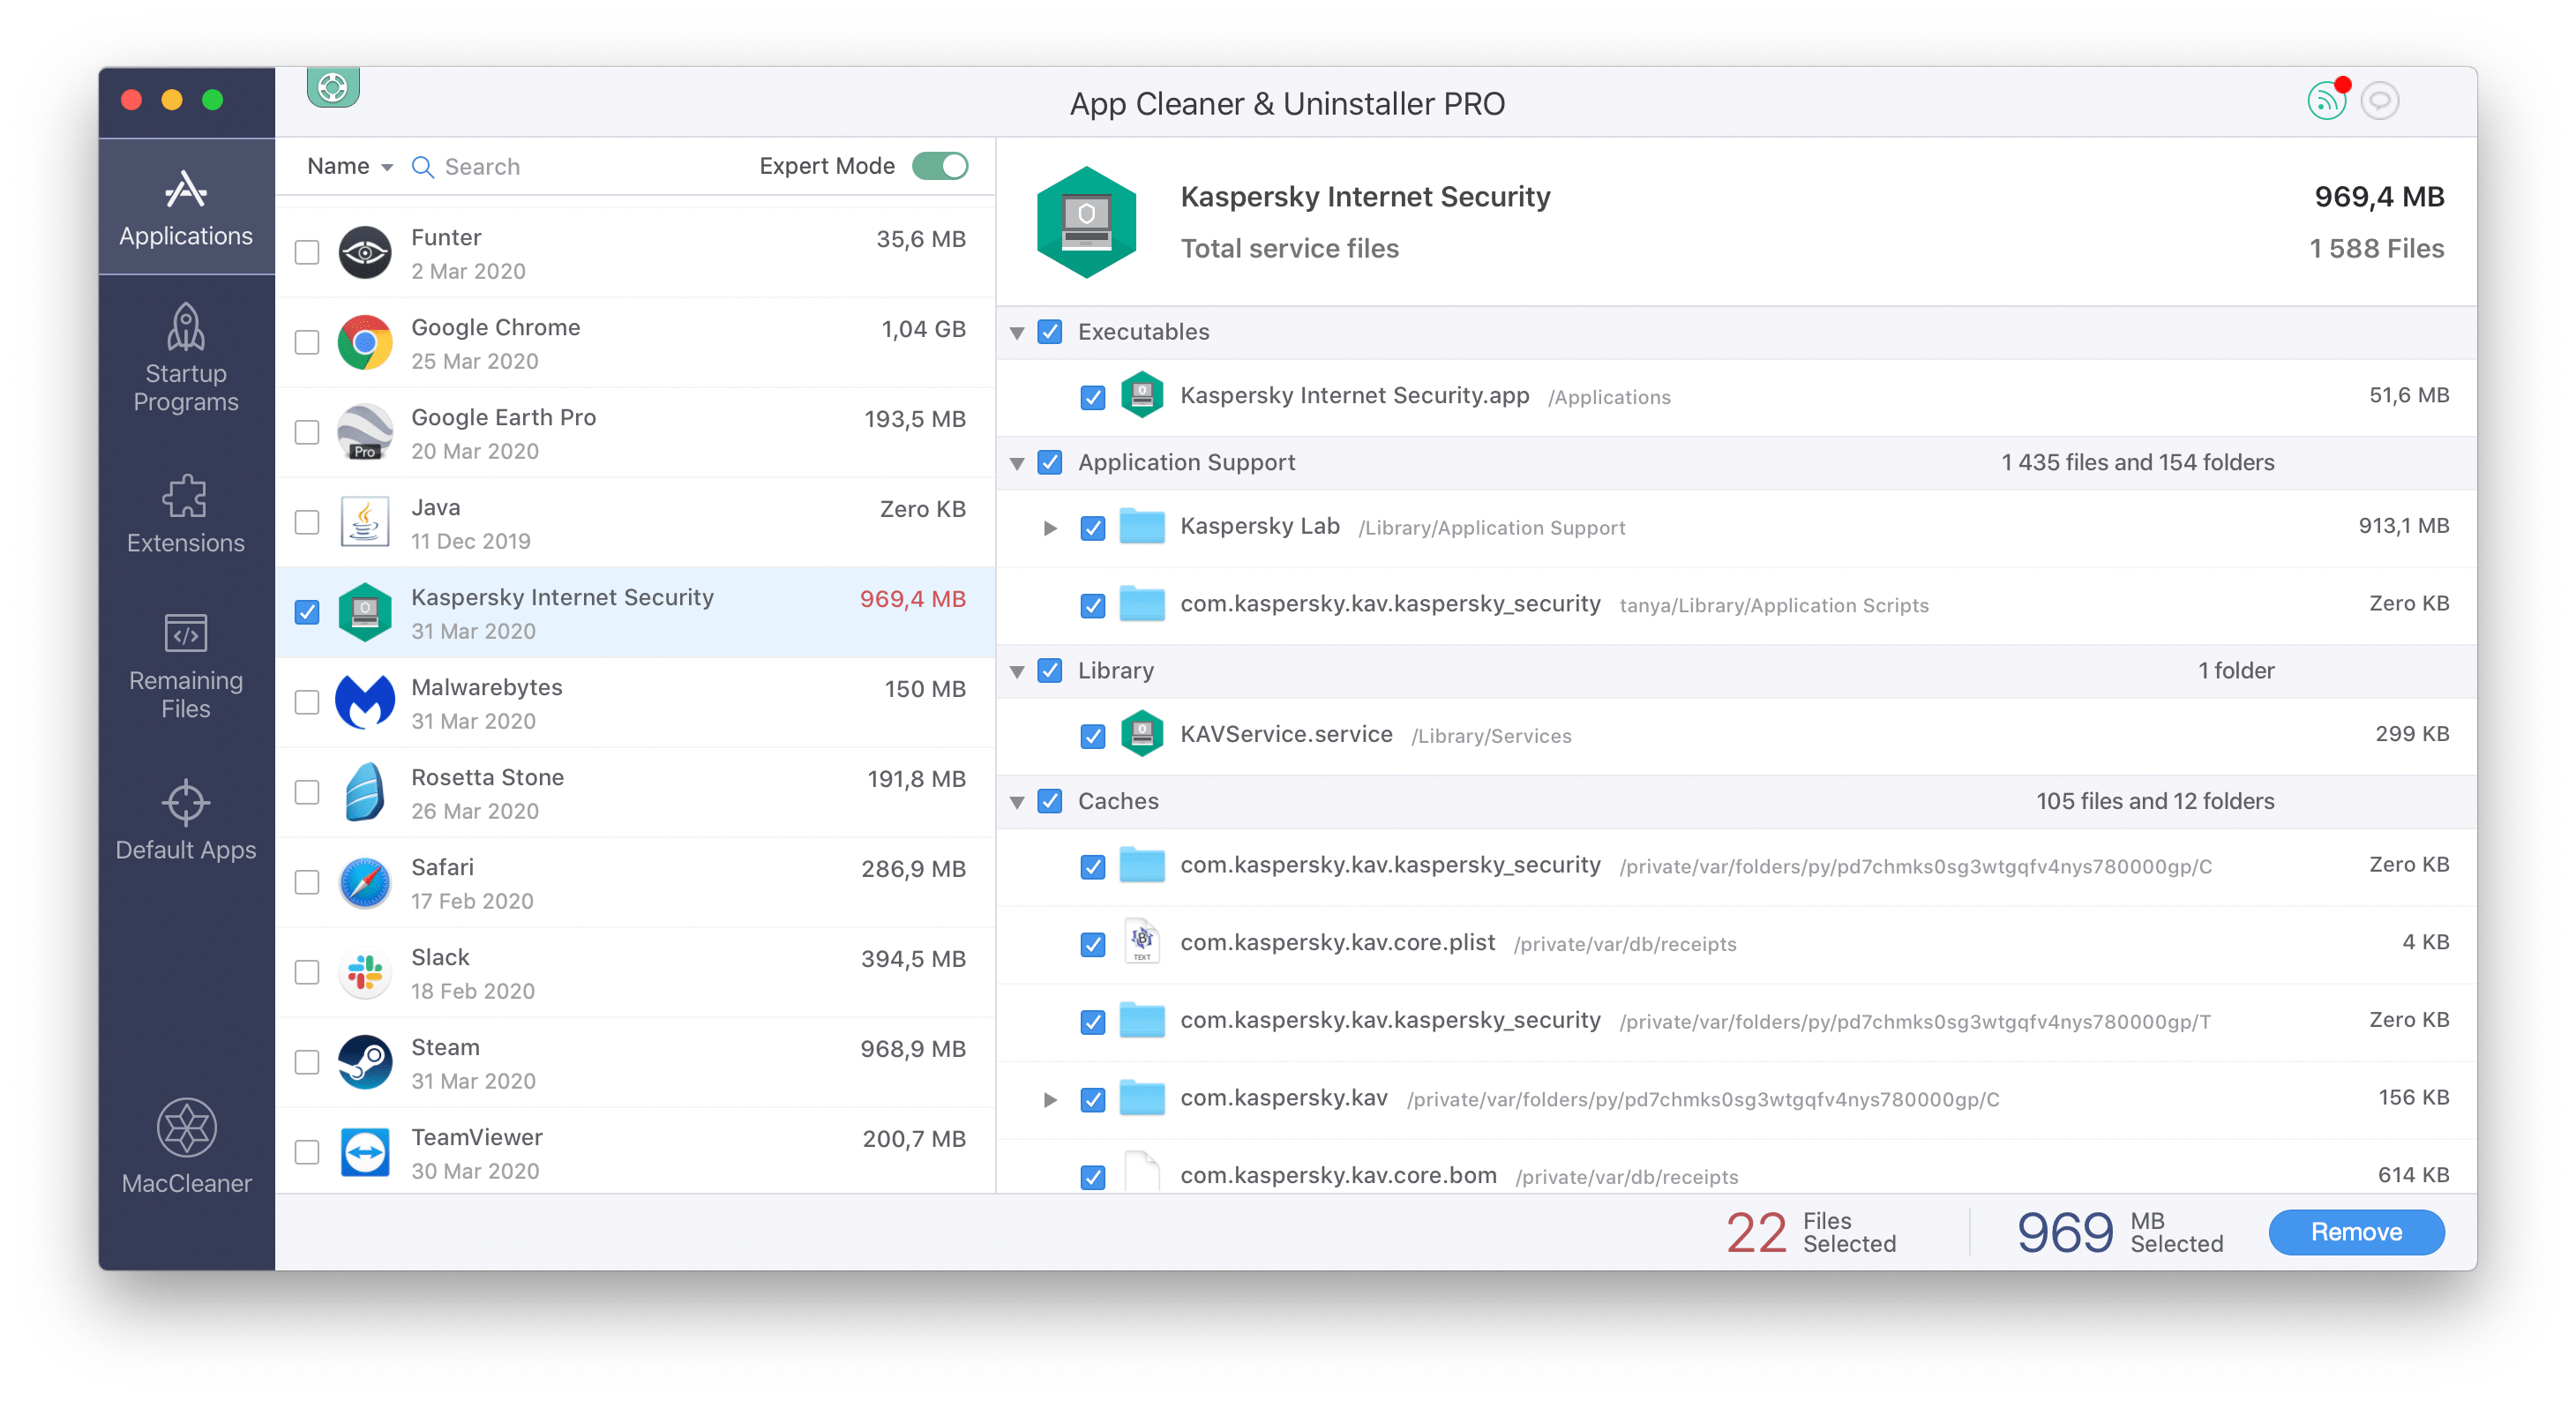 App Cleaner & Uninstaller showing Kaspersky with its service files